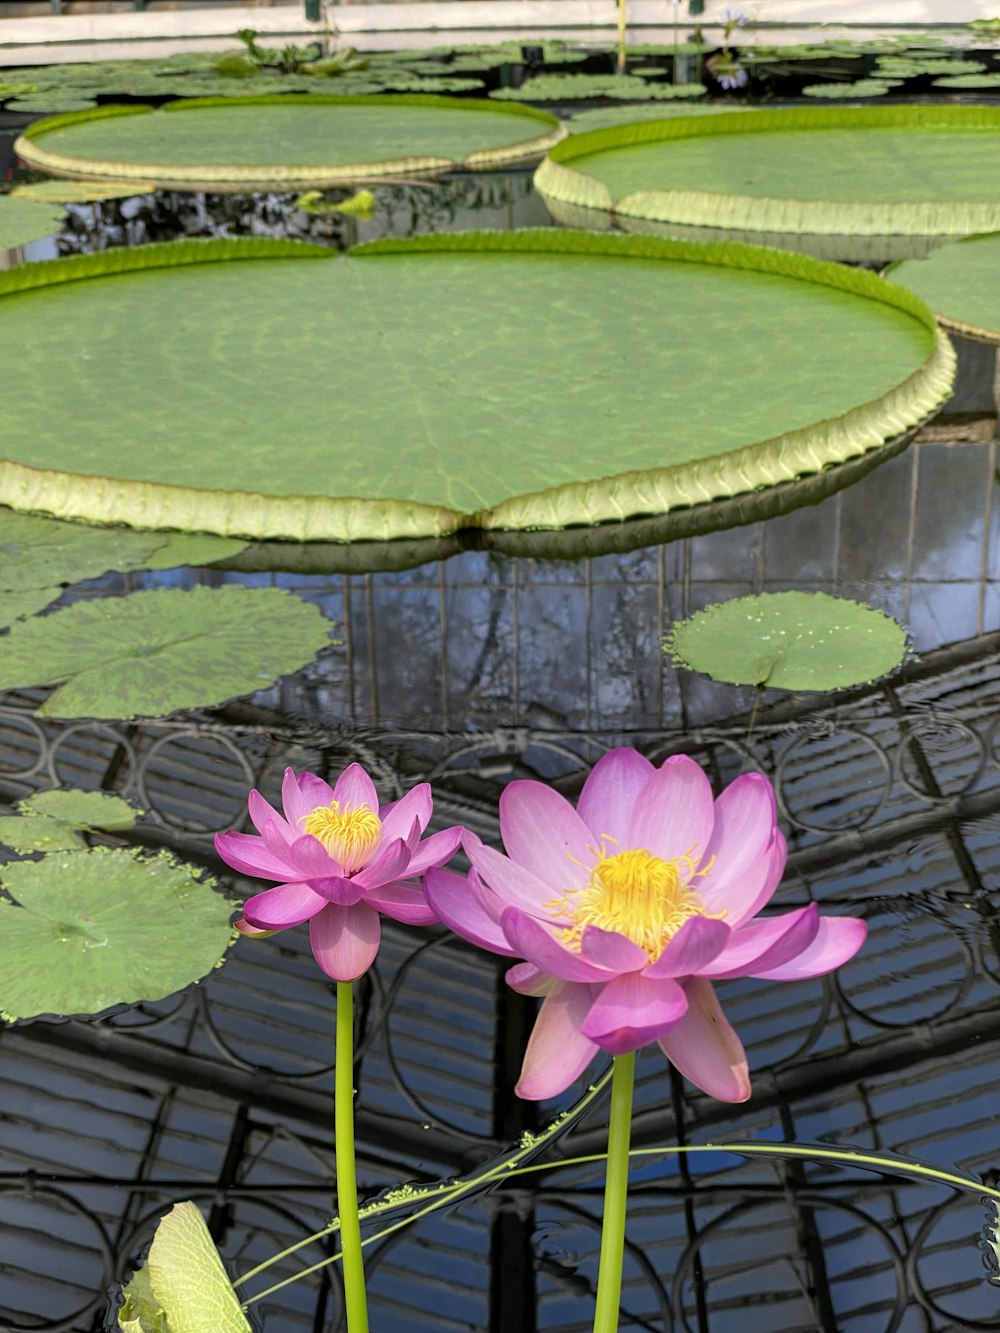 a group of flowers in a pond